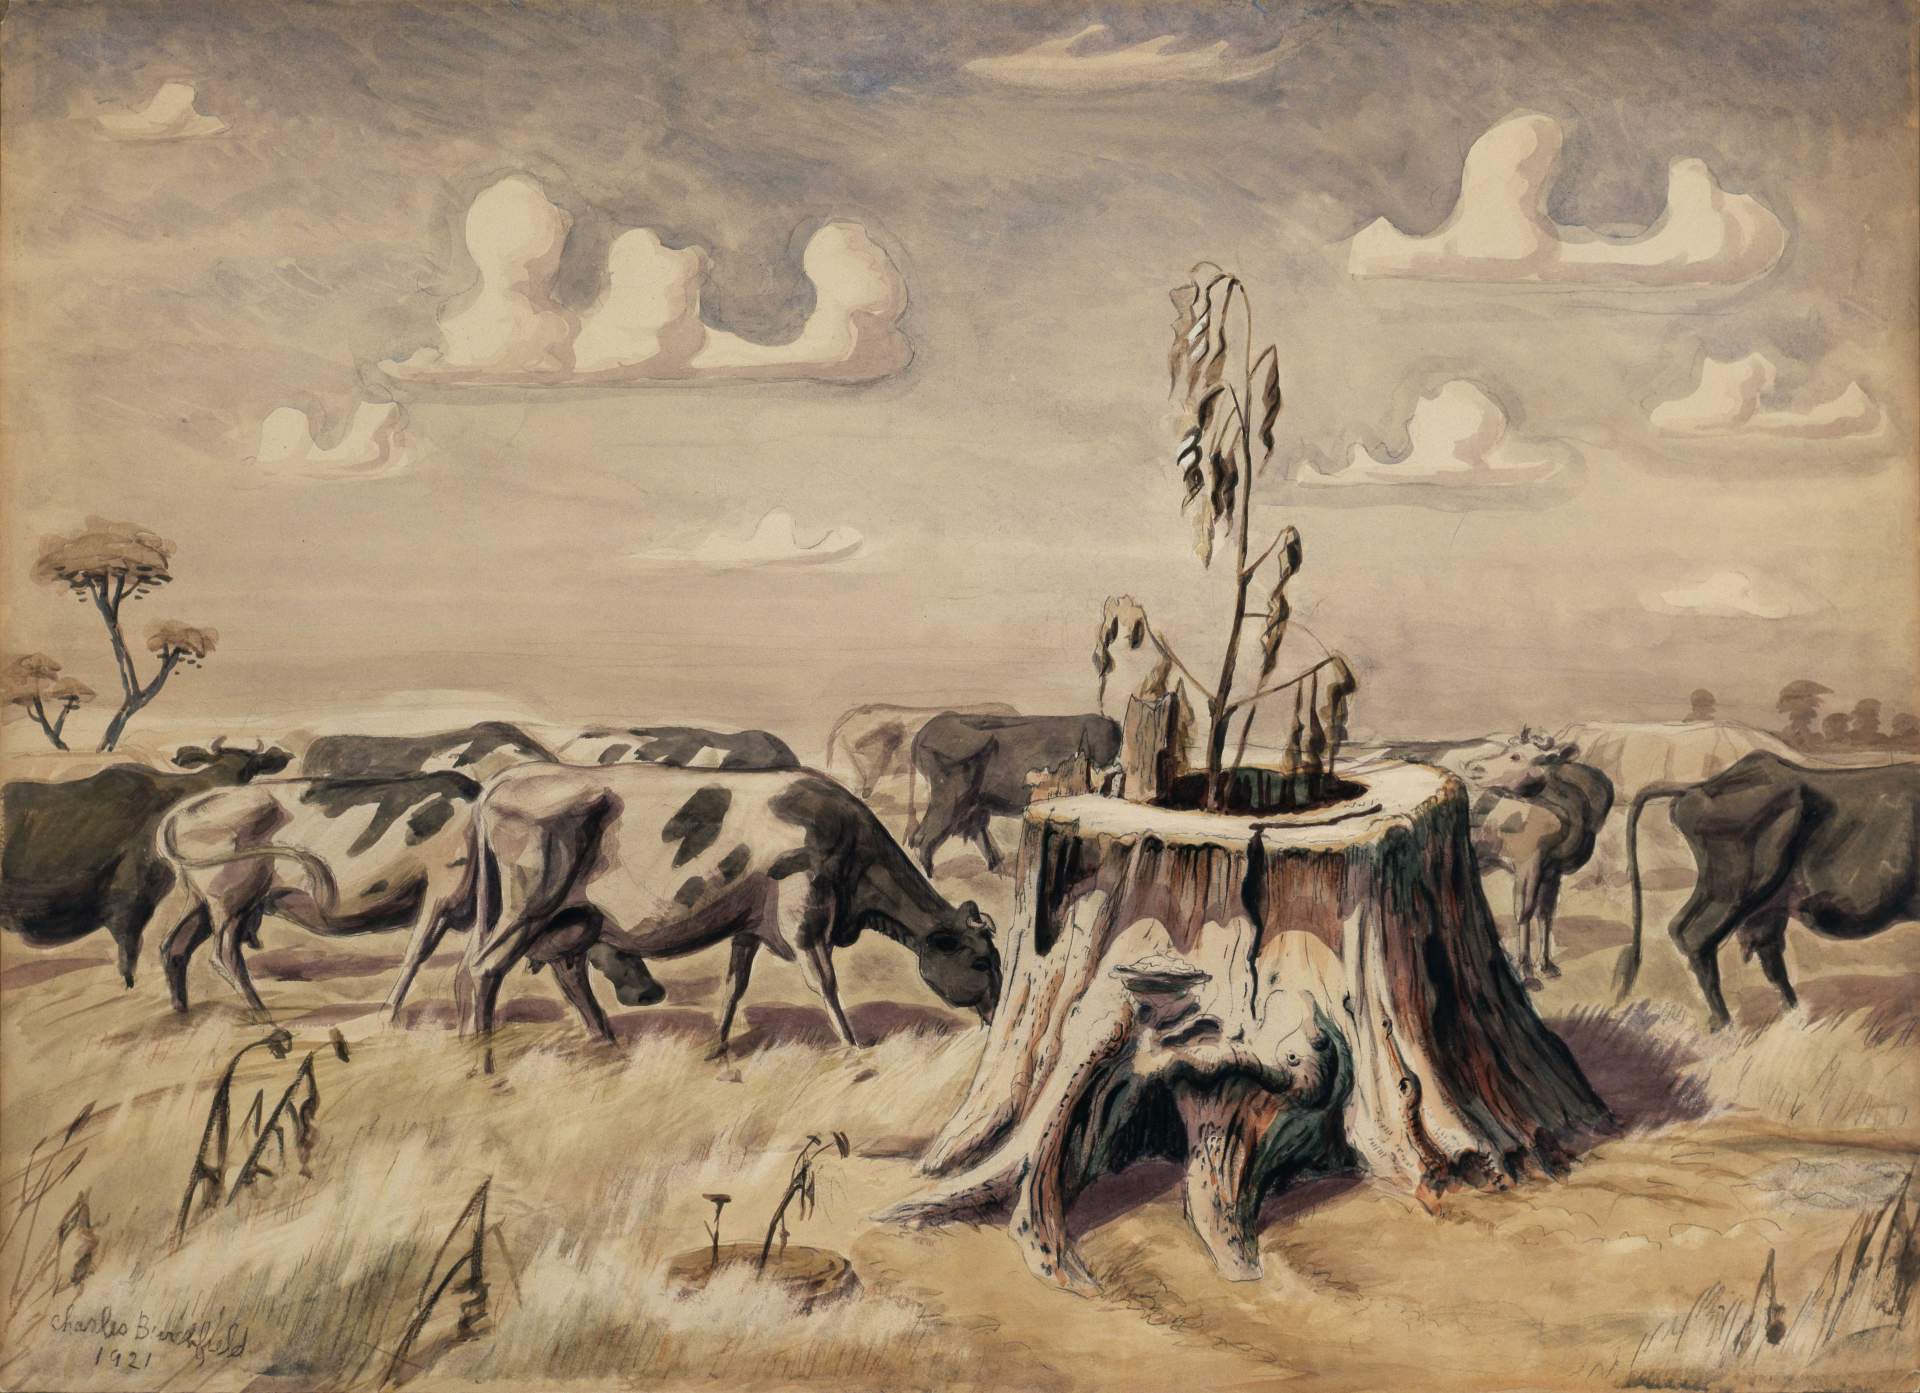 From a folder titled <em>1929 – A – DRAWINGS AND NOTES</em> in the Charles E. Burchfield Foundation Archives